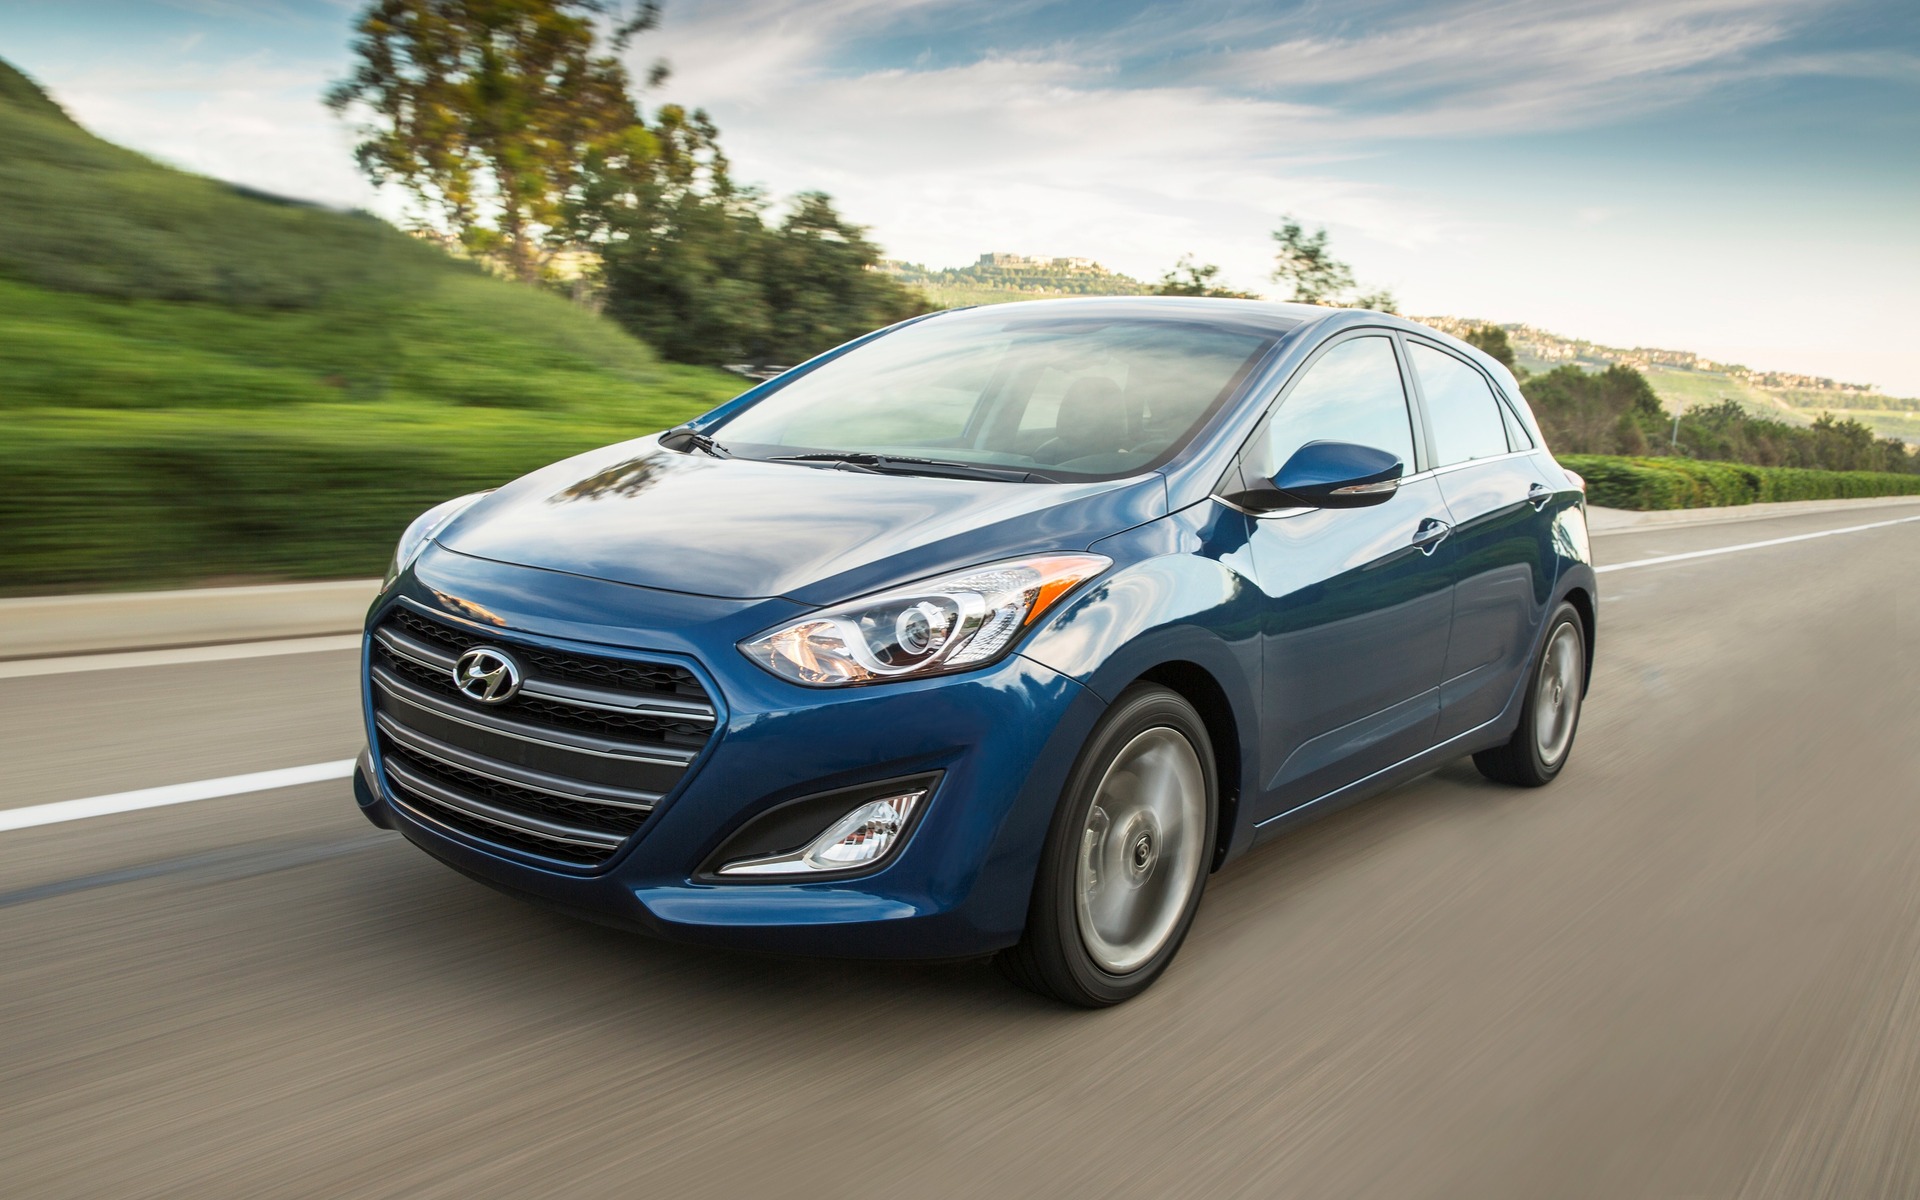 2016 Hyundai Elantra - News, reviews, picture galleries and videos - The  Car Guide